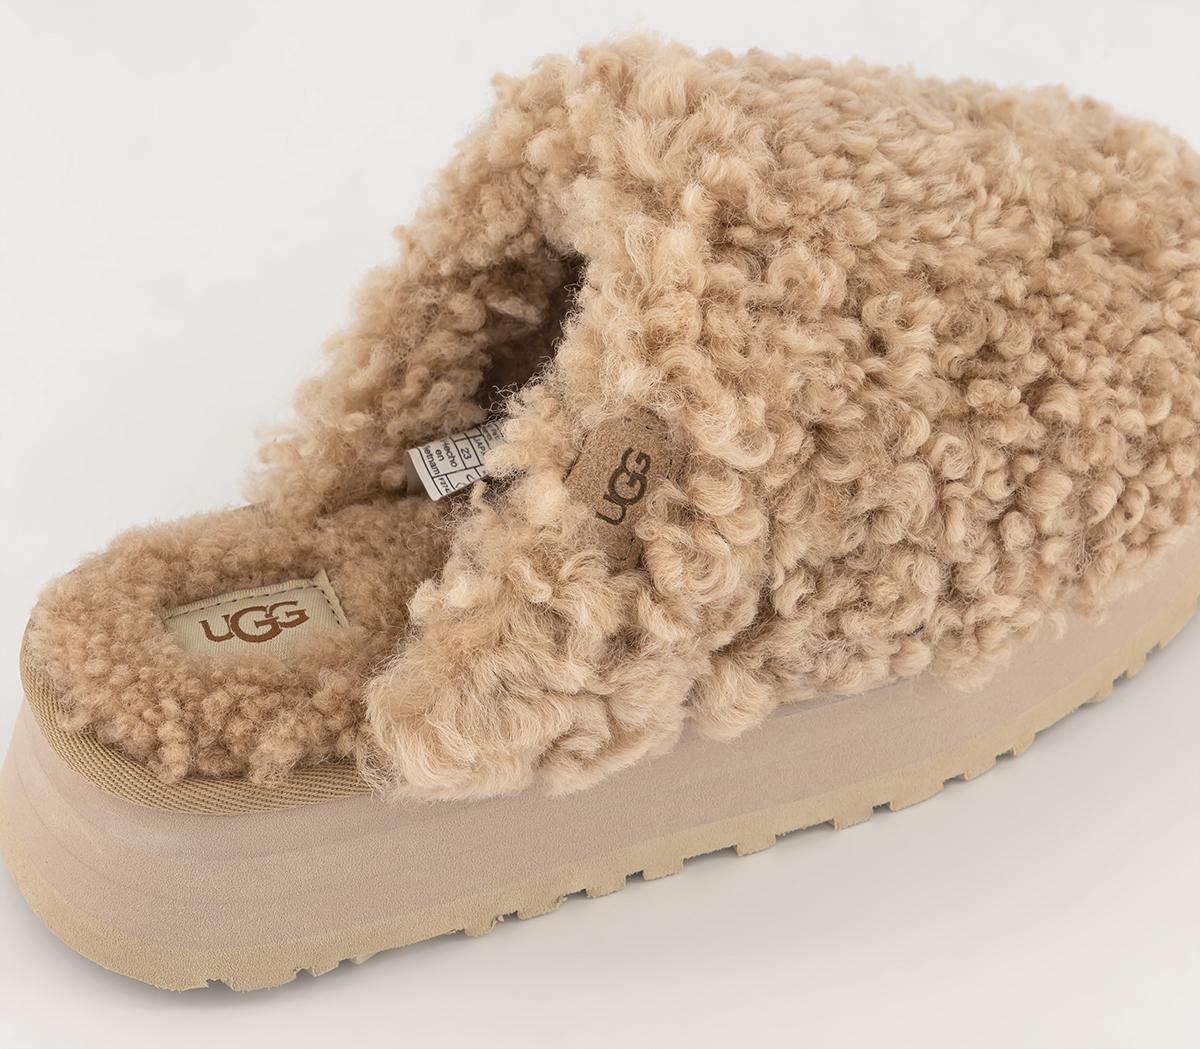 UGG Maxi Curly Platform Slippers Sand - UGG Slippers